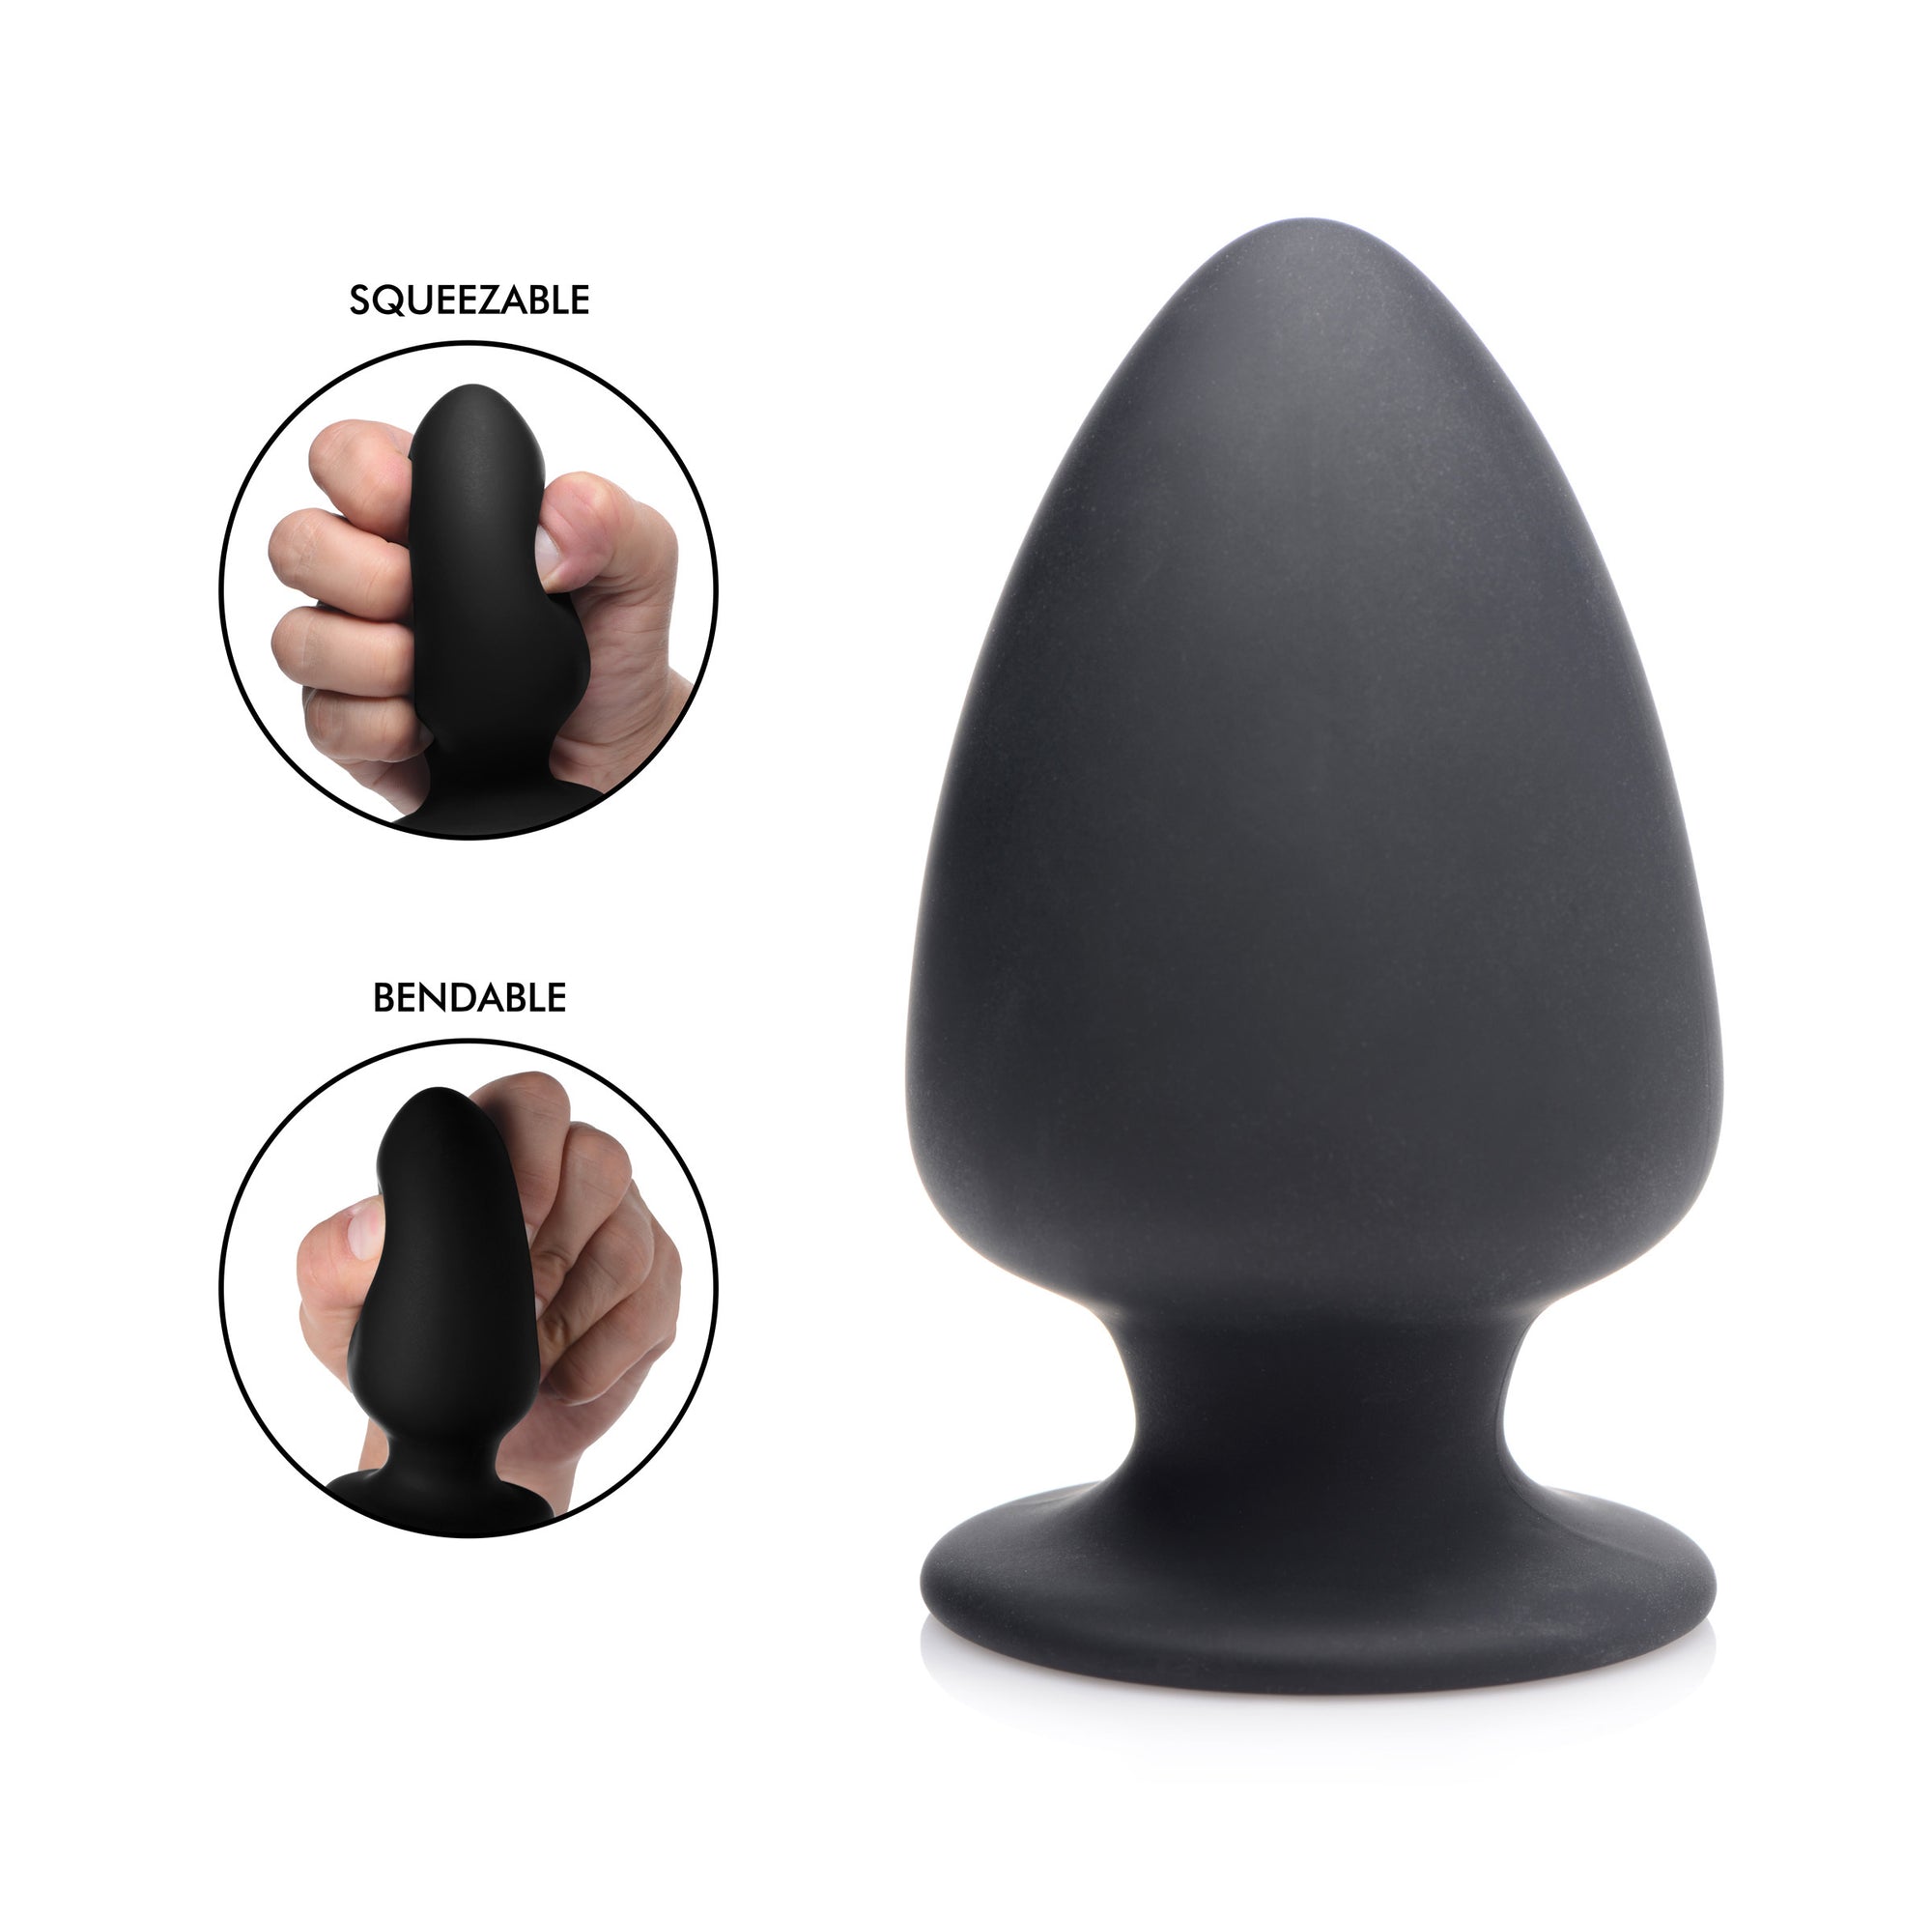 Squeezable Silicone Anal Plug - Medium 
Anal Toys
Squeeze-It Cupid’s Secret Stash